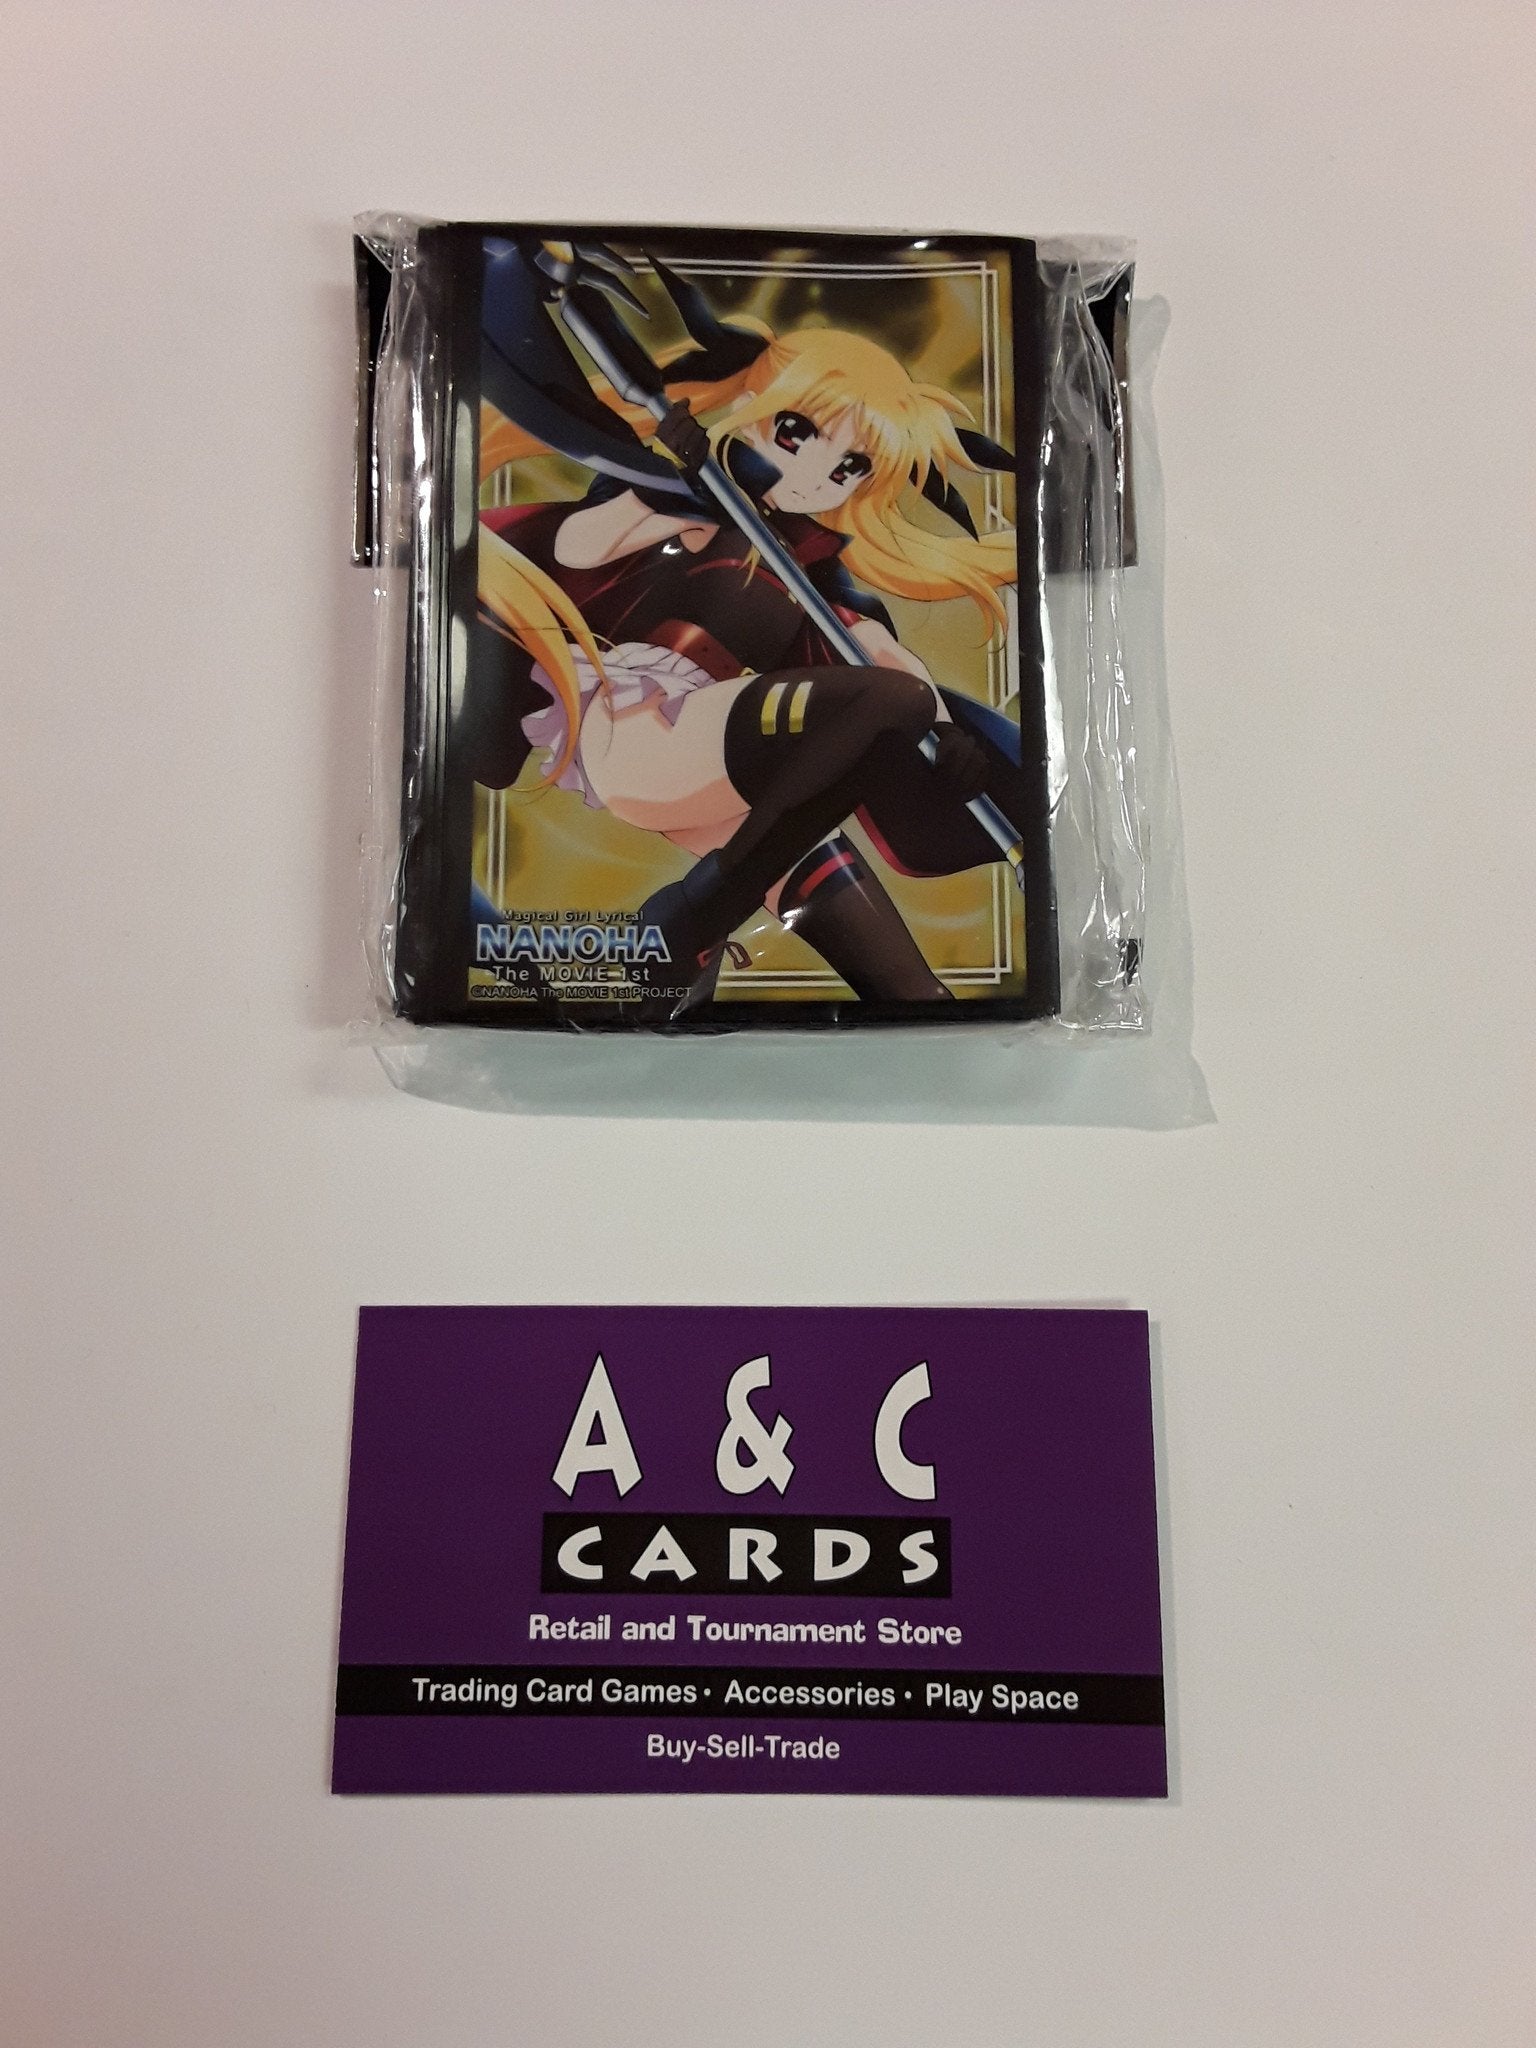 Character Sleeves "Fate Testarossa" #2 - 1 pack of Standard Size Sleeves 60pc. - Nanoha